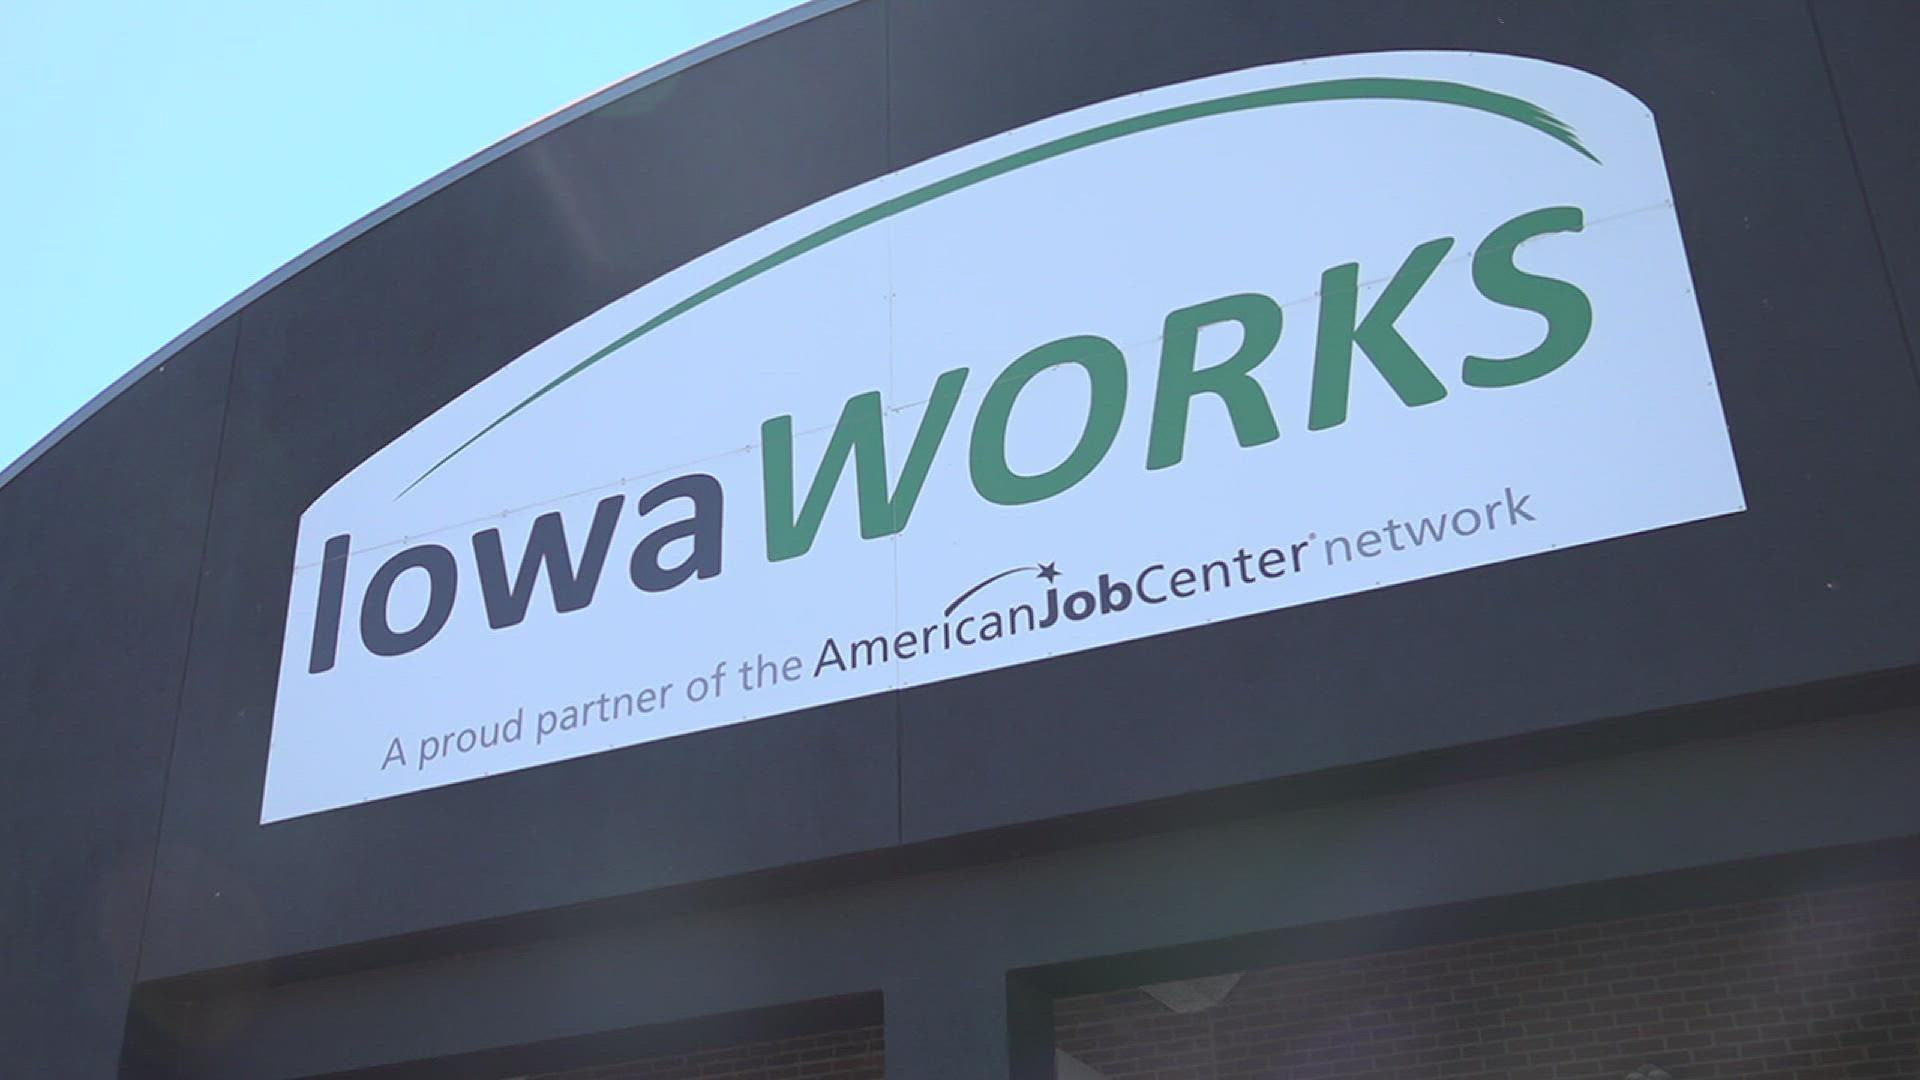 IowaWorks Martha Garcia-Tappa says the organization is bringing a diverse amount of job opportunities fit for any job seeker.